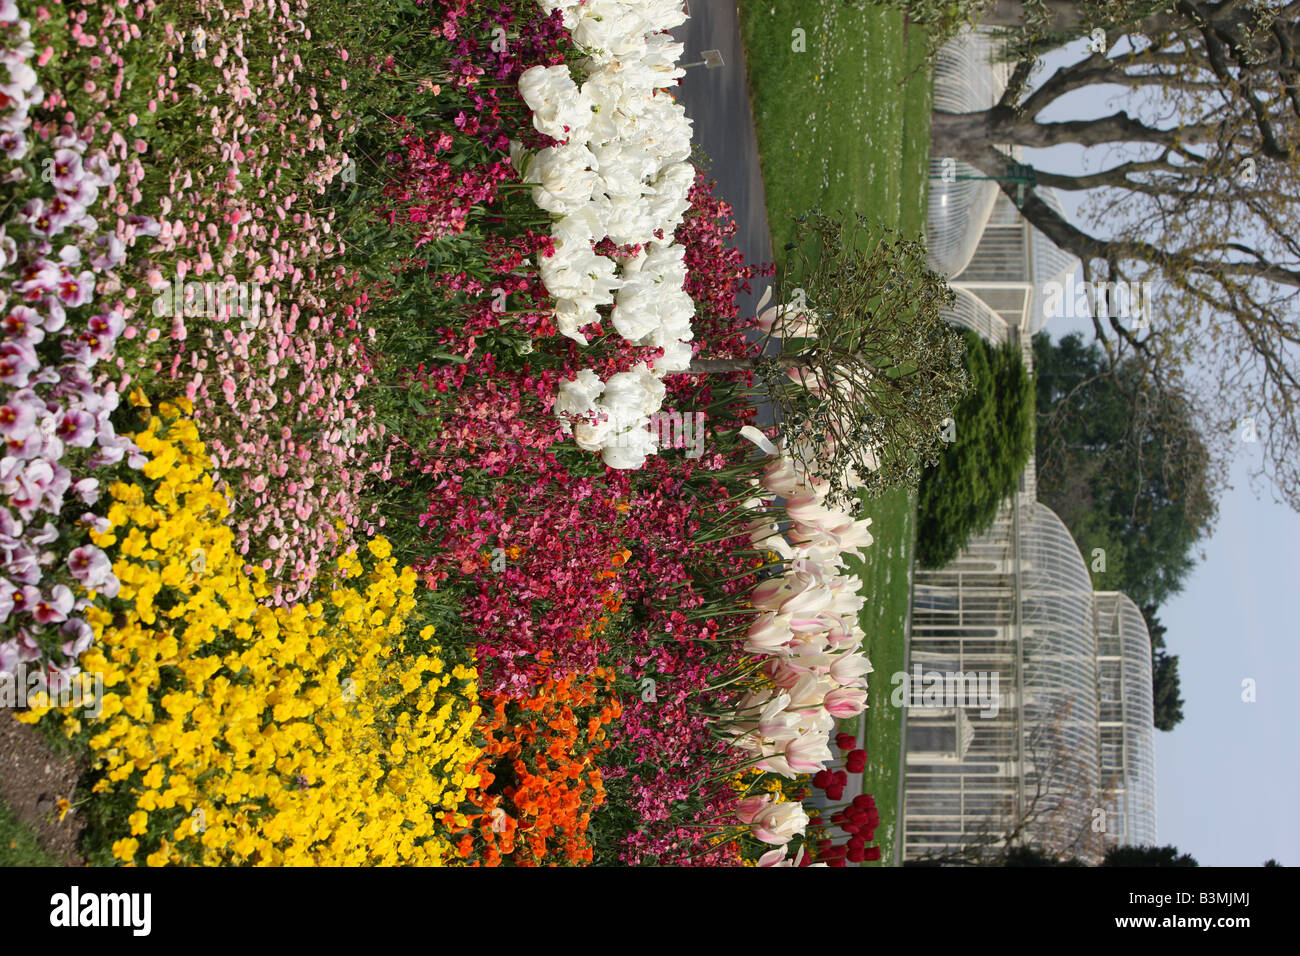 Bedding plants in the foreground with greenhouses in the background Stock Photo